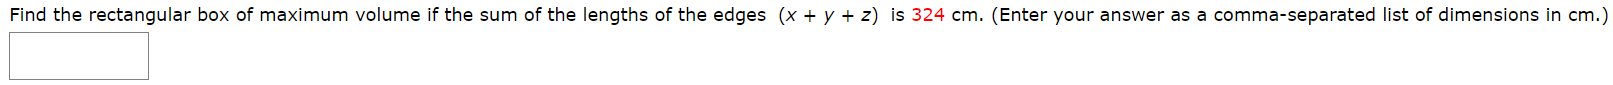 Find the rectangular box of maximum volume if the sum of the lengths of the edges (x + y + z) is 324 cm. (Enter your answer as a comma-separated list of dimensions in cm.
